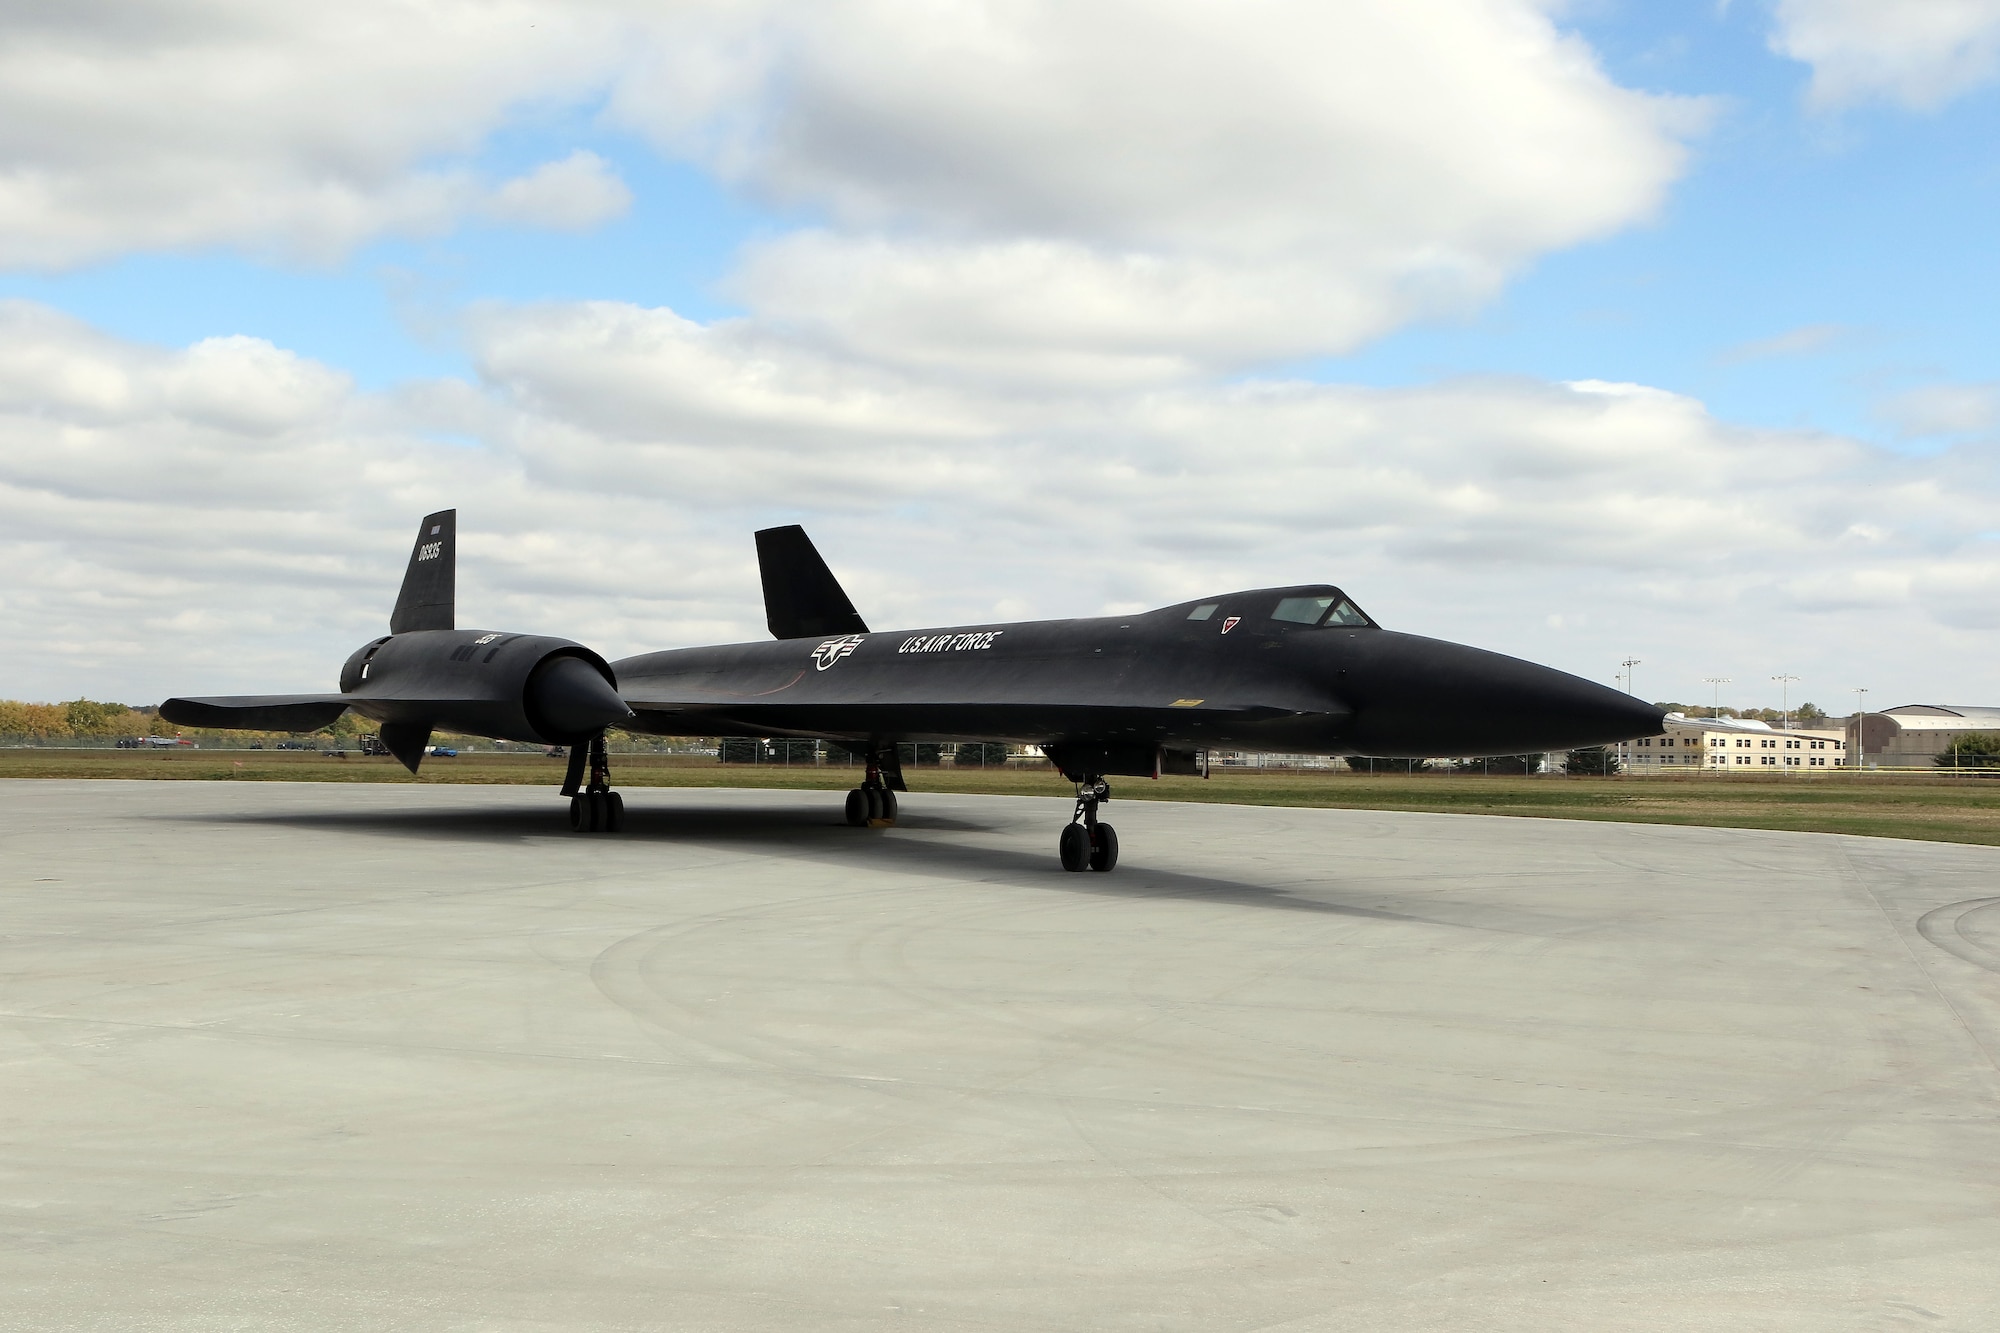 Restoration staff move the Lockheed YF-12A into the new fourth building at the National Museum of the U.S. Air Force on Oct. 13, 2015. (U.S. Air Force photo by Don Popp) 